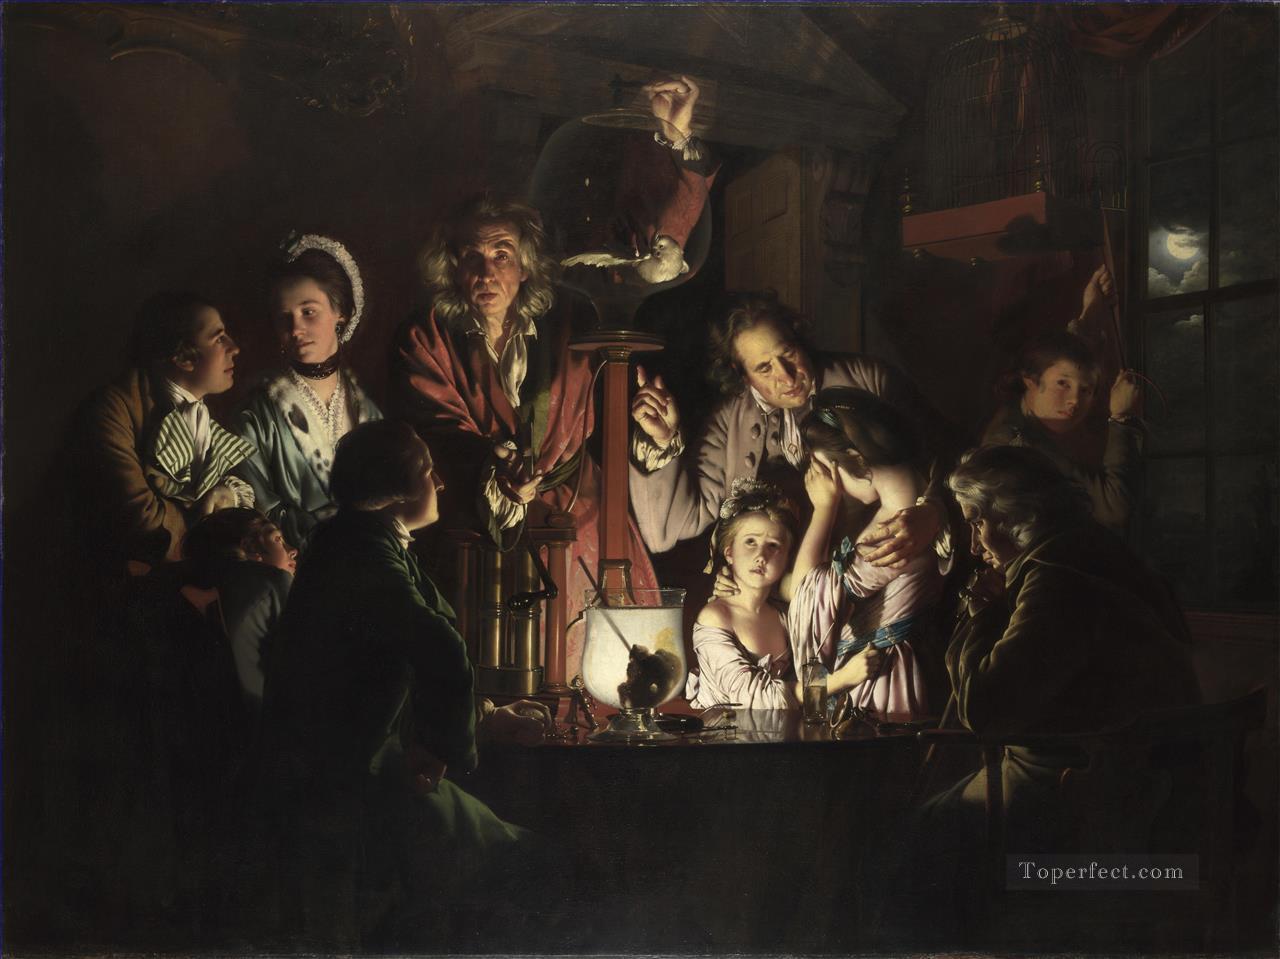 Joseph Wright of Derby: An Experiment on a Bird in the Air Pump